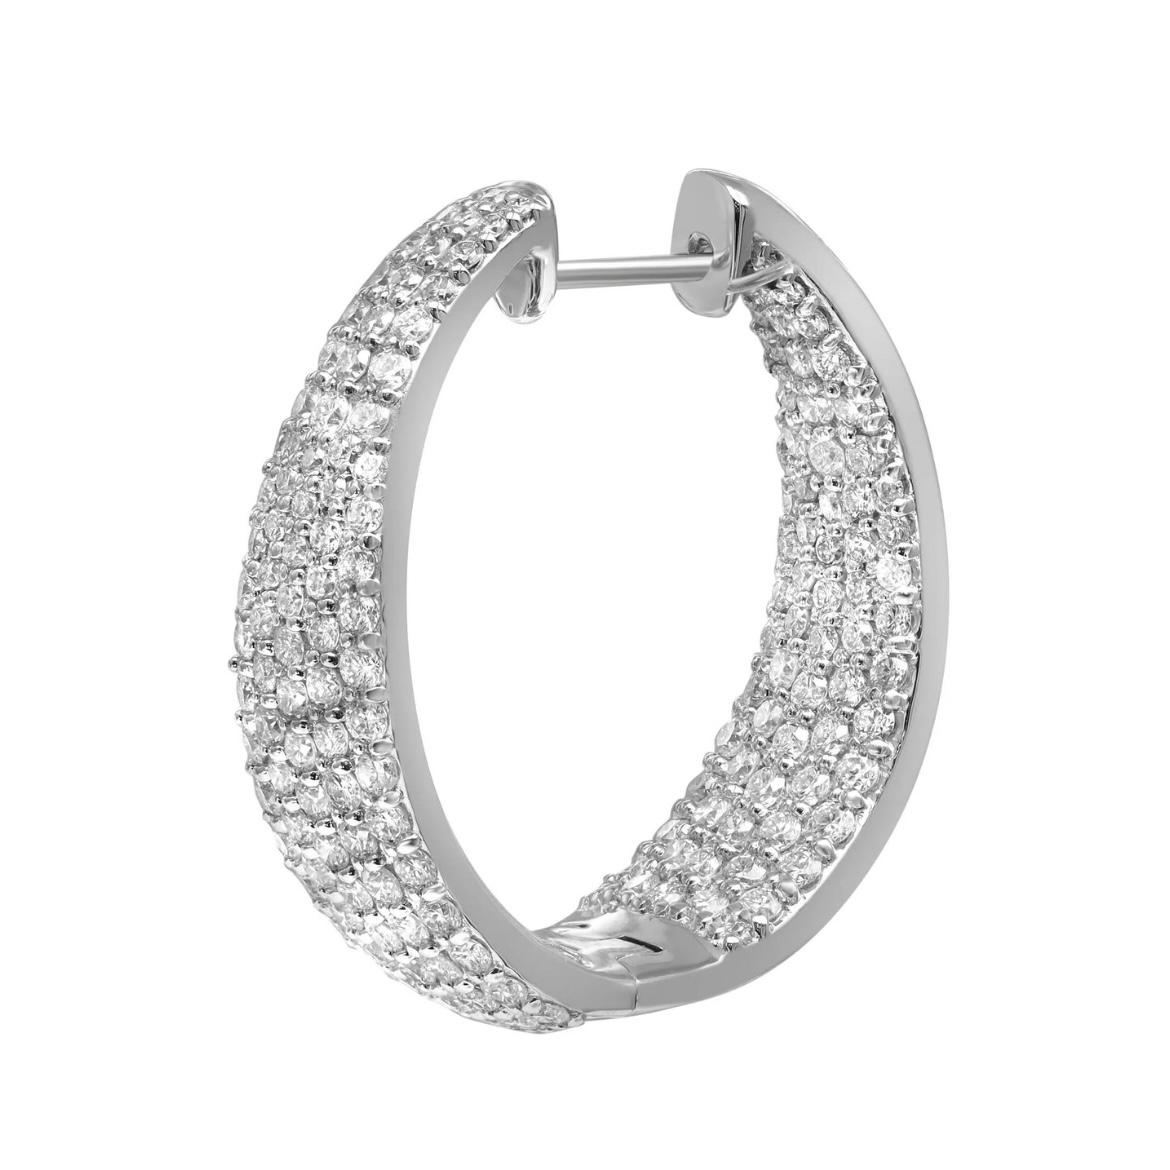 3.29 Carat Round Cut Diamond Hoop Earrings 18K White Gold In New Condition For Sale In New York, NY